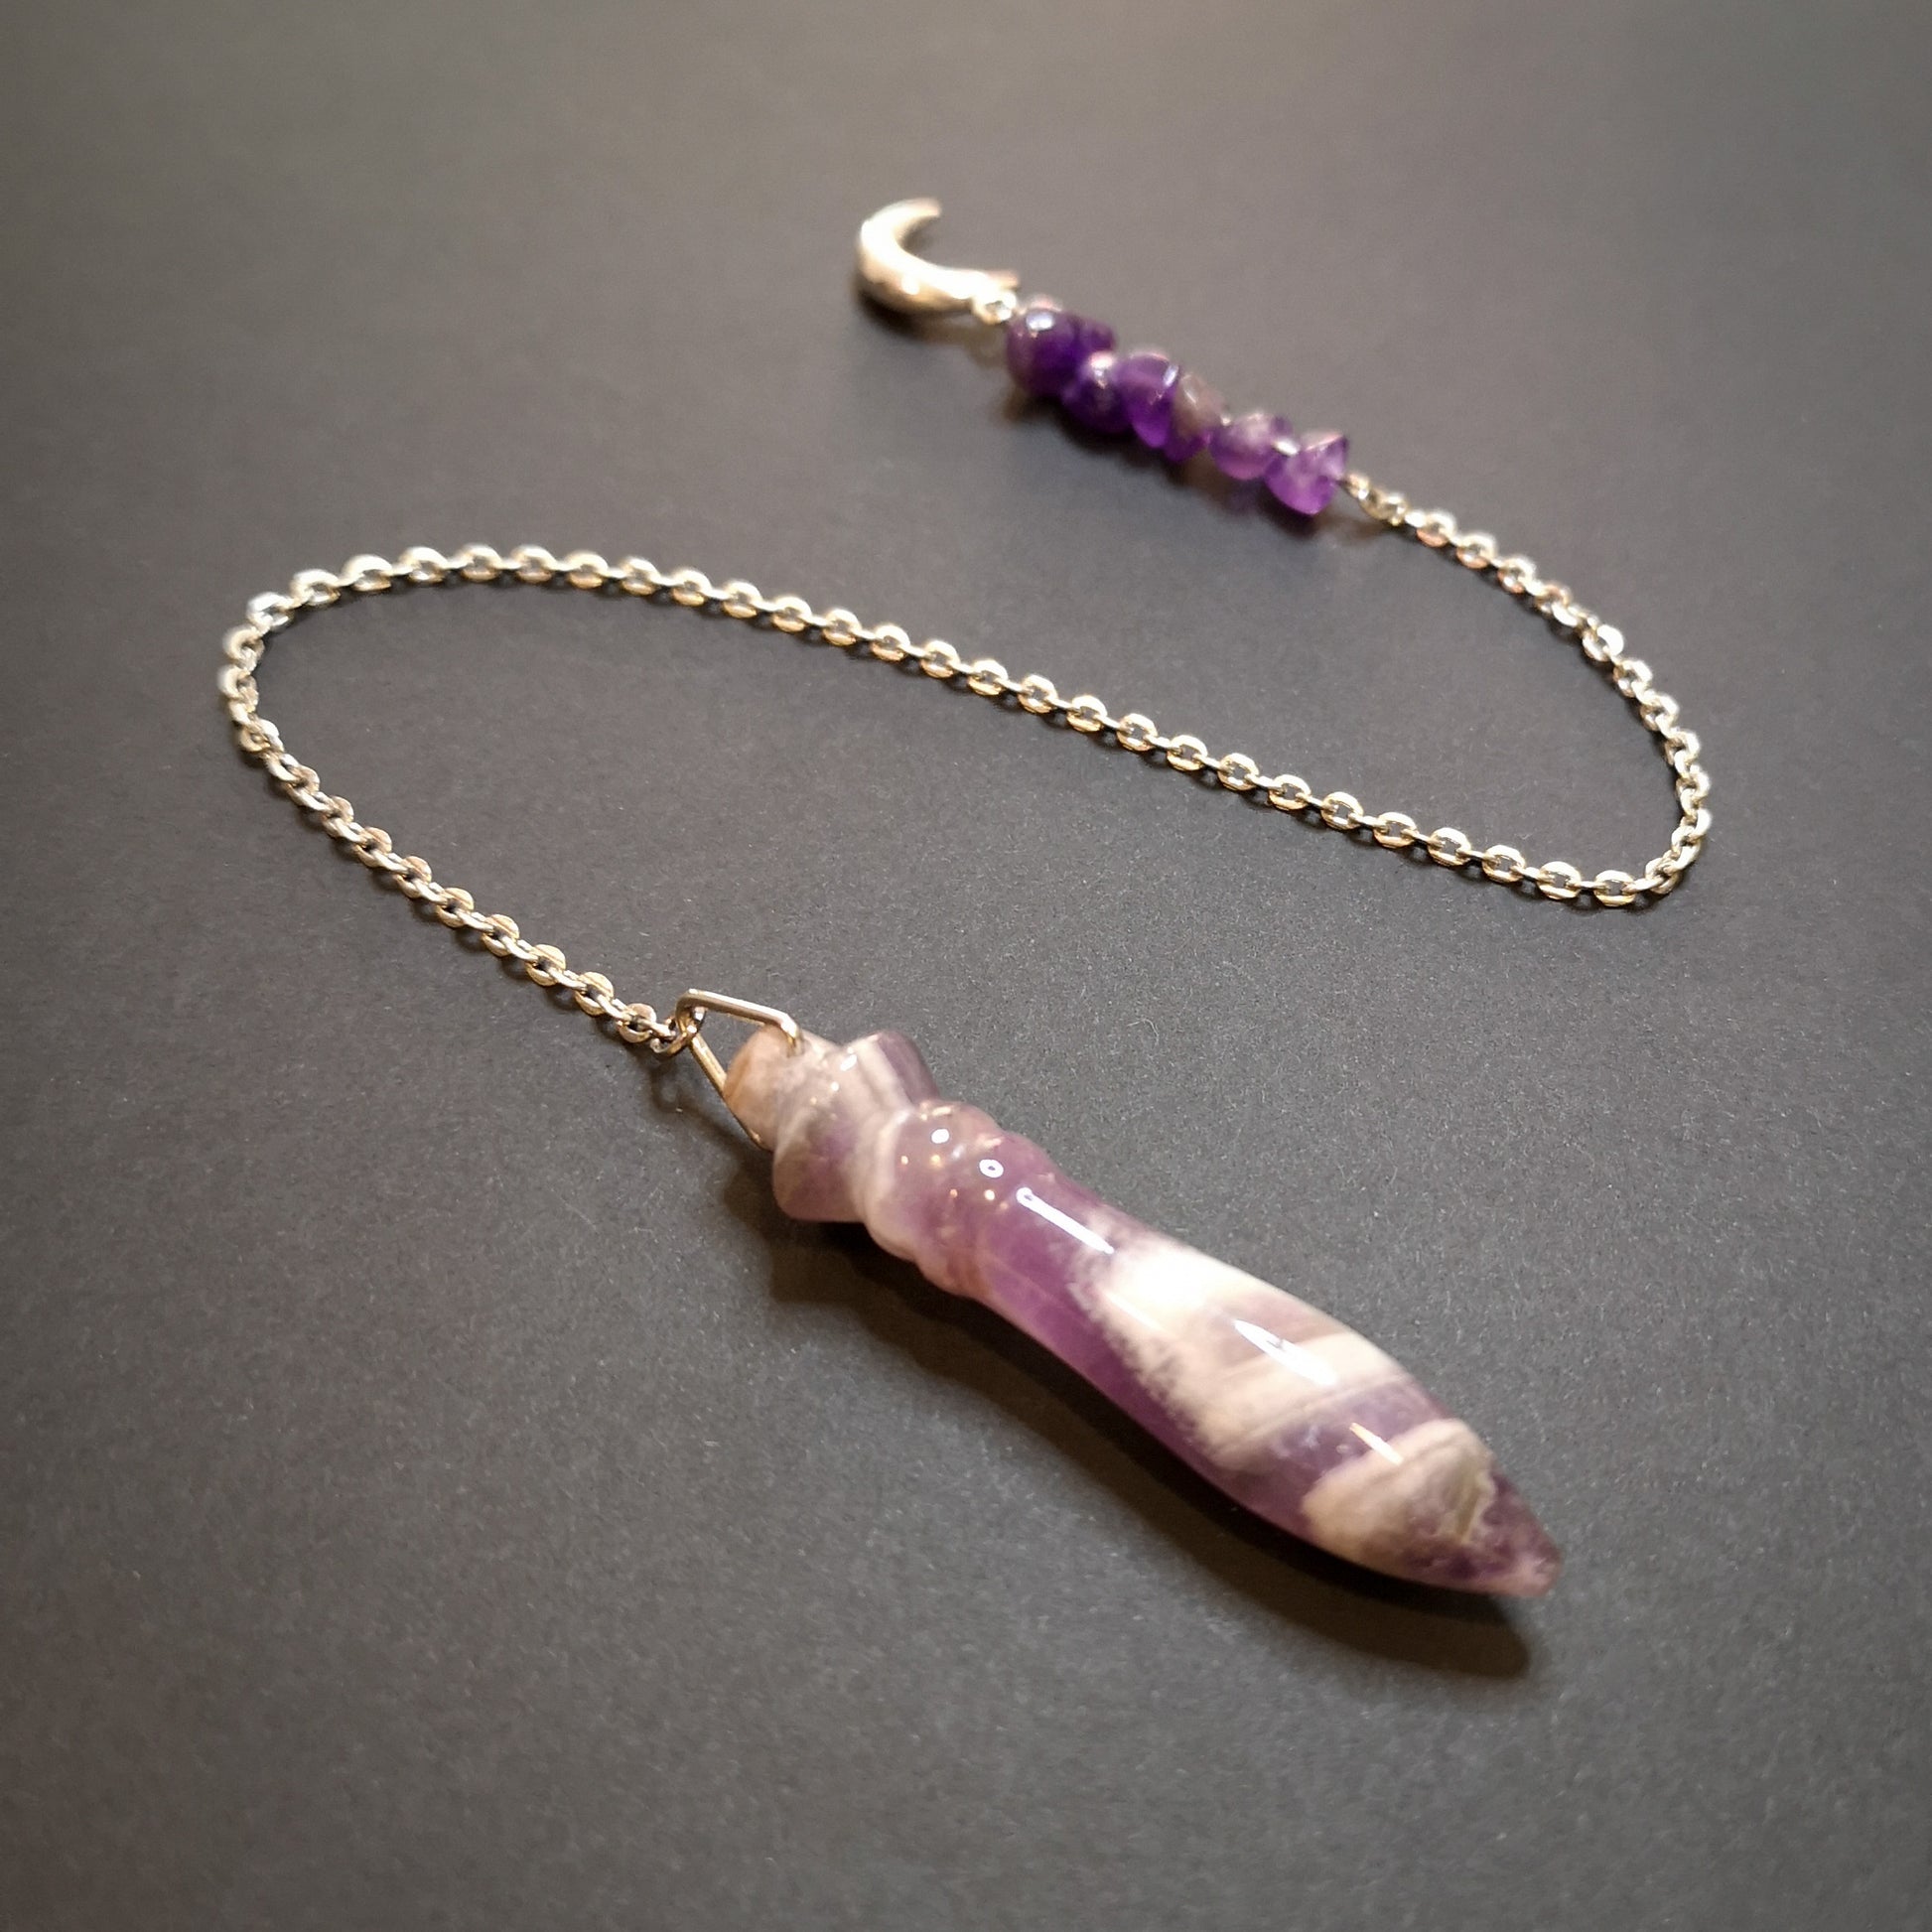 Egyptian Thot pendulum amethyst and moon crescent - The French Witch shop